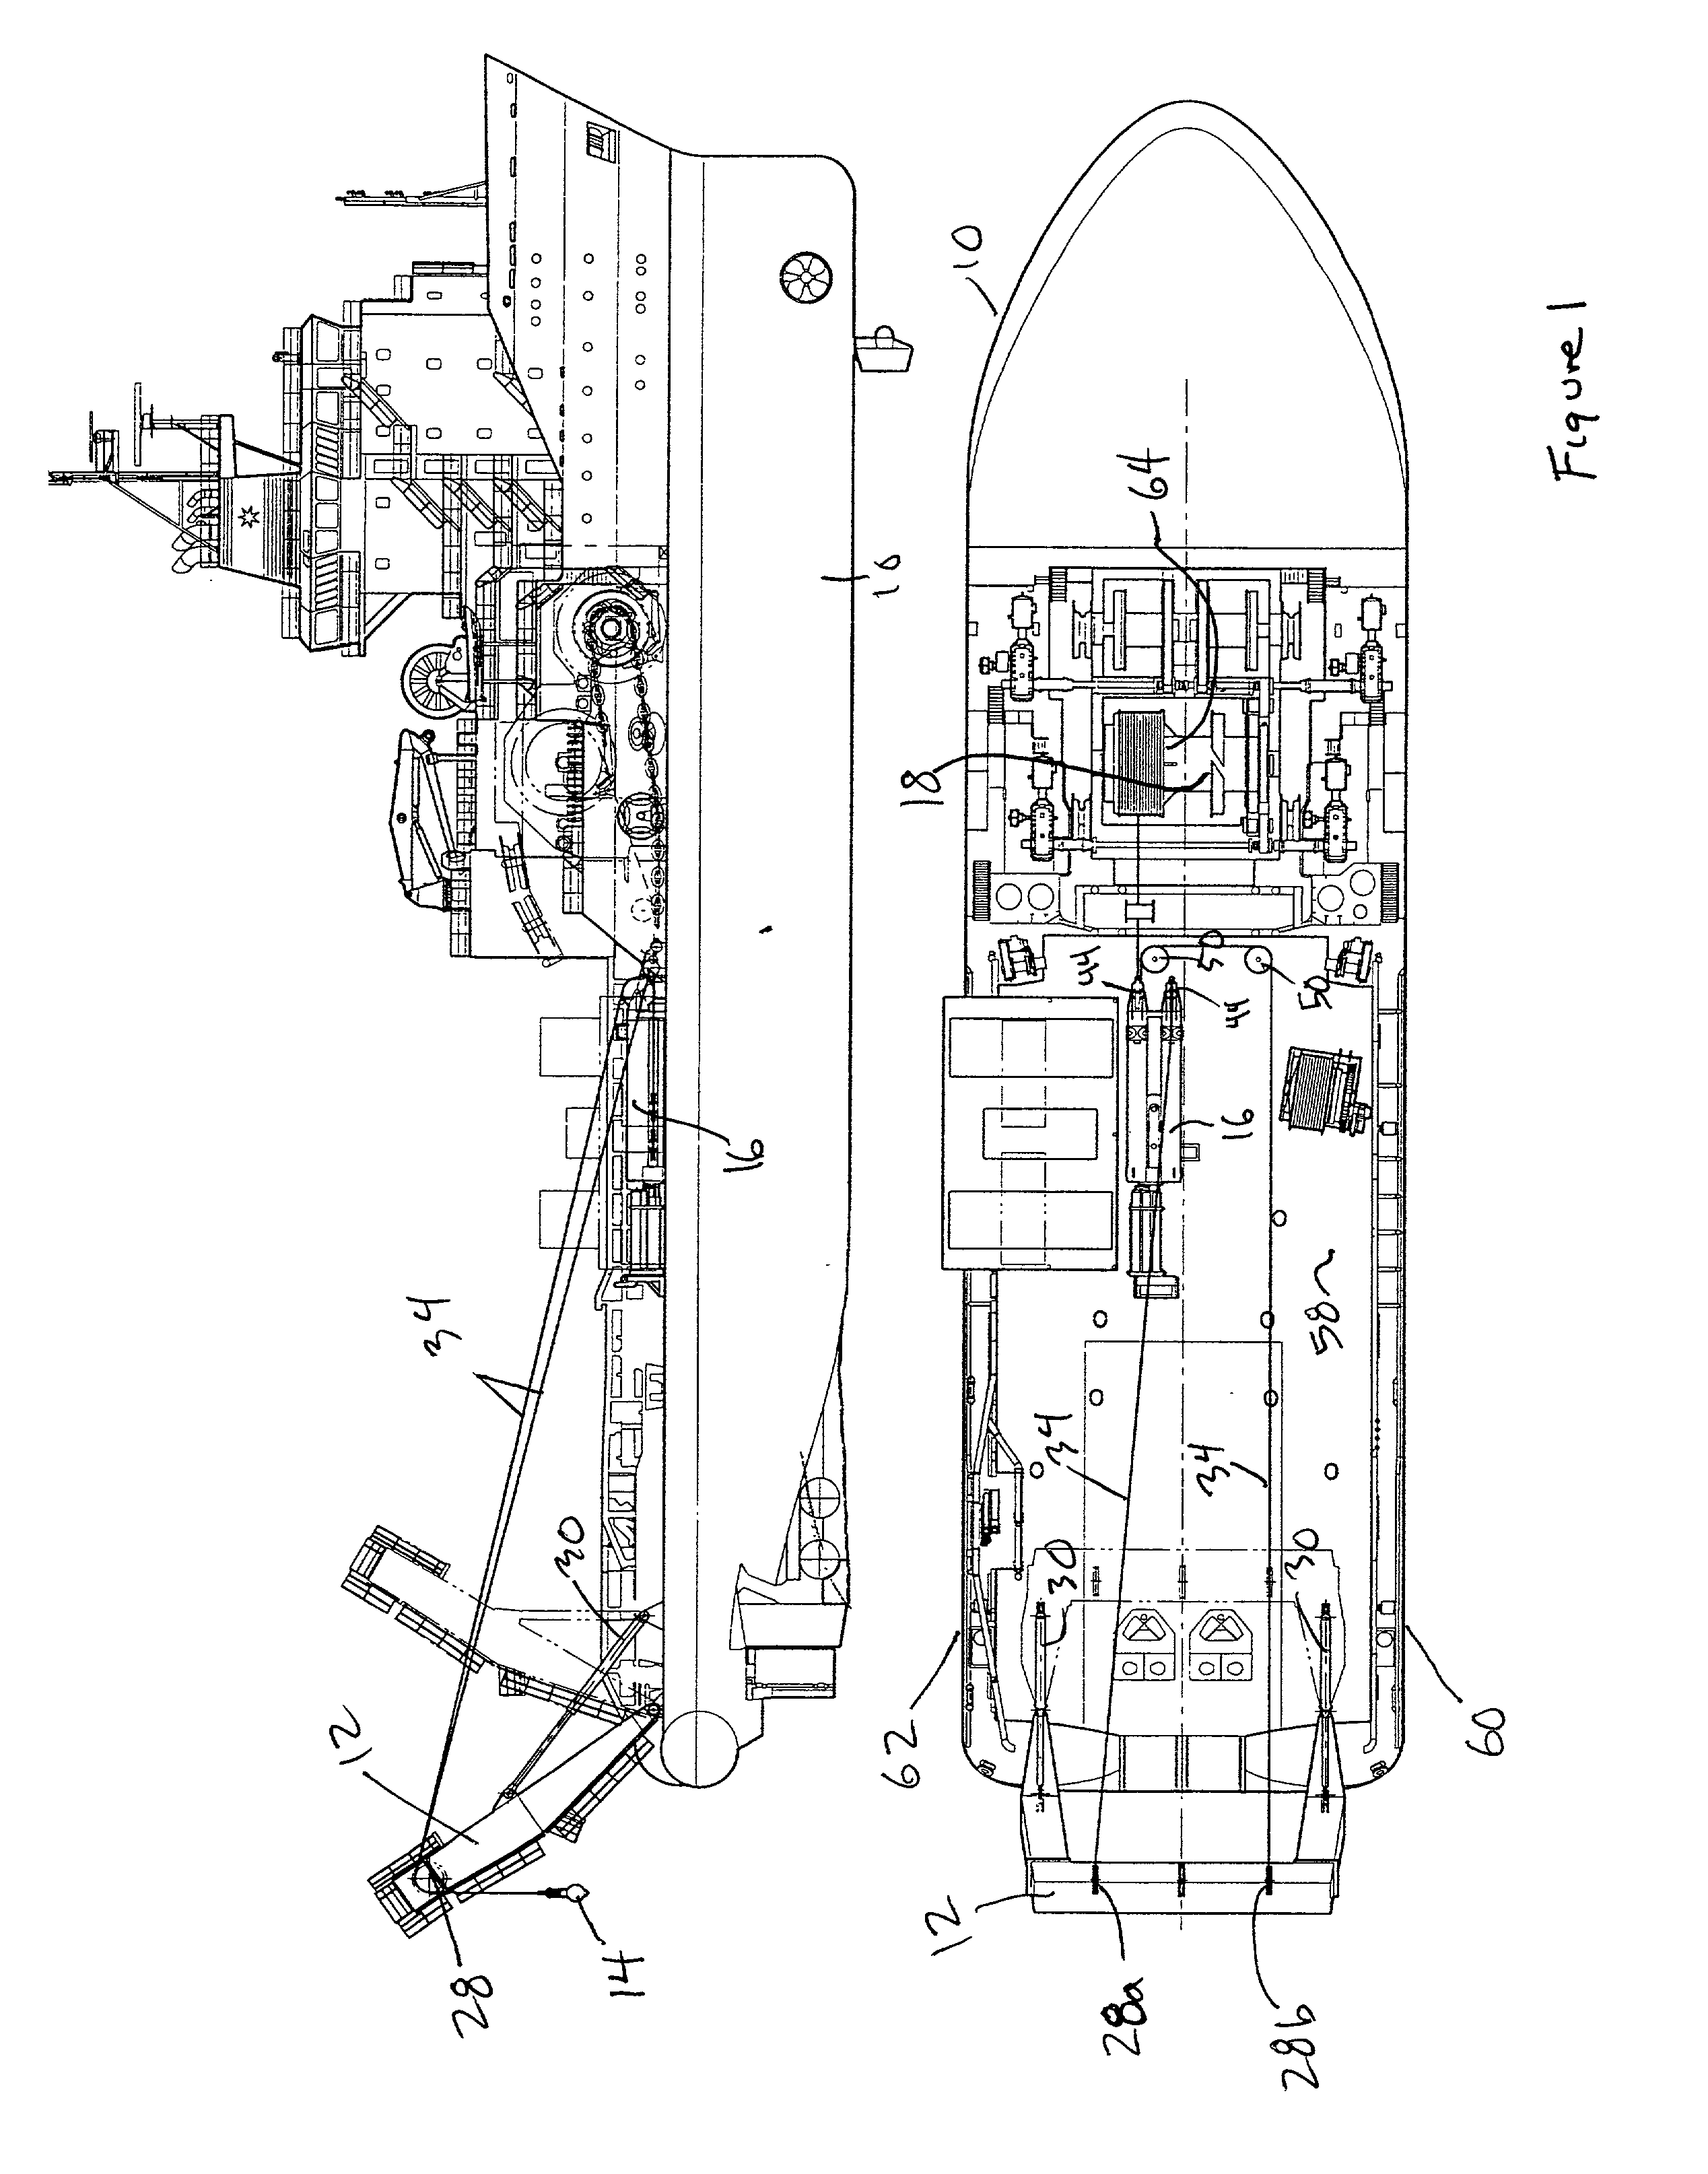 Apparatus for and method of installing subsea components